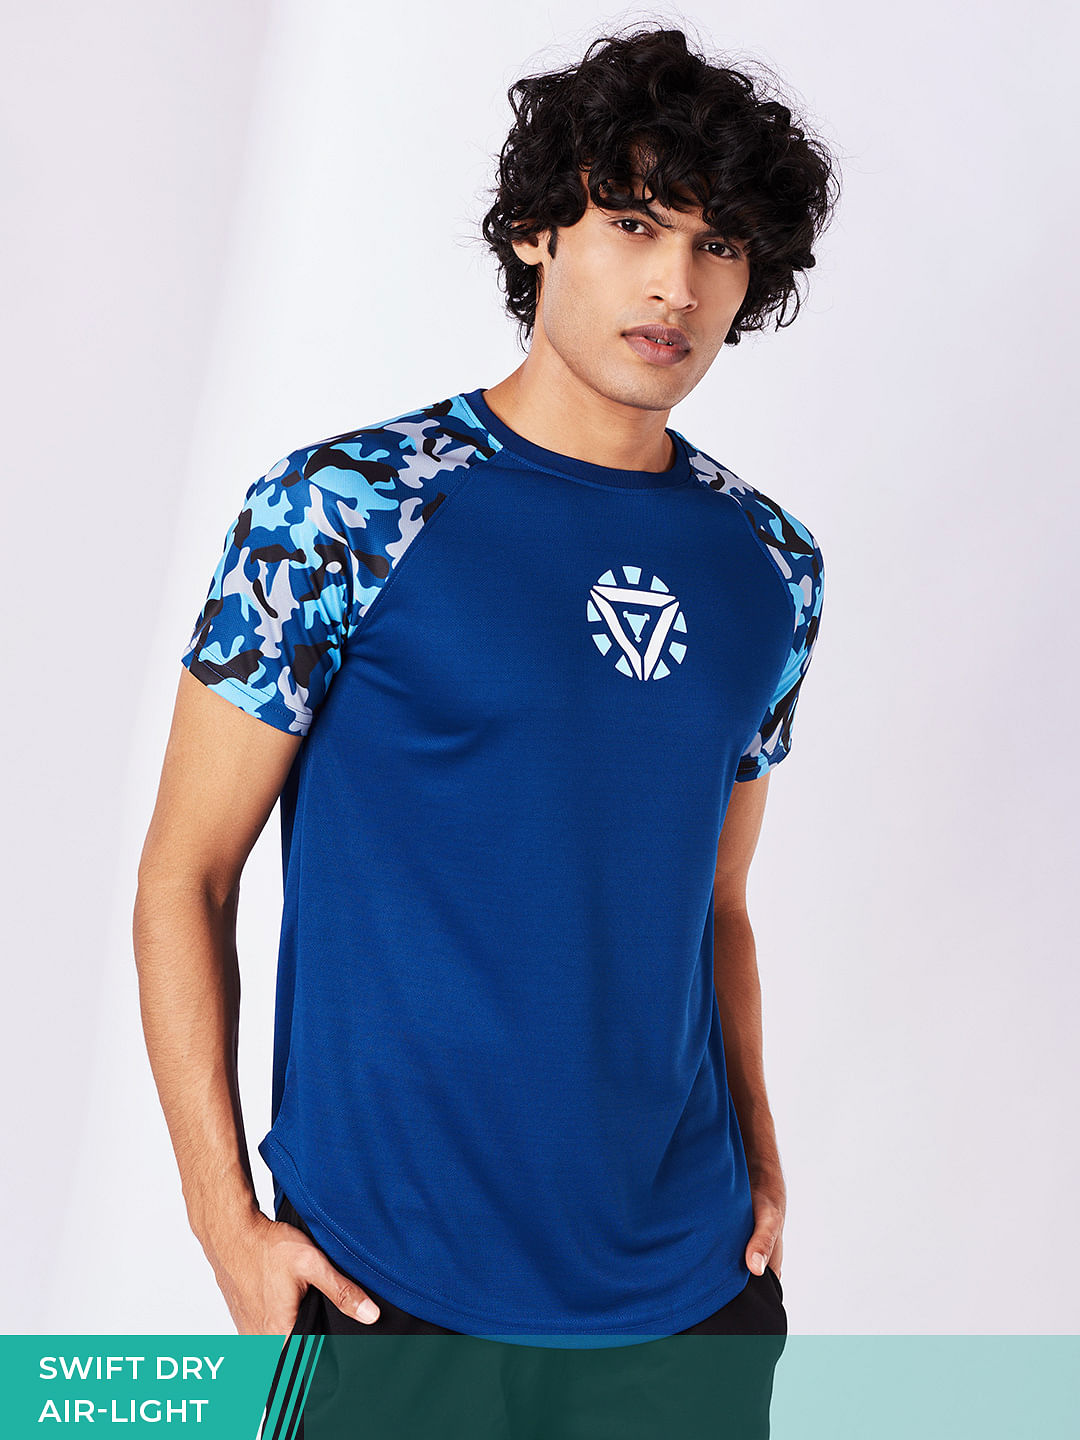 Buy Athleisure Camo Cool Blue Performance Jersey Online.